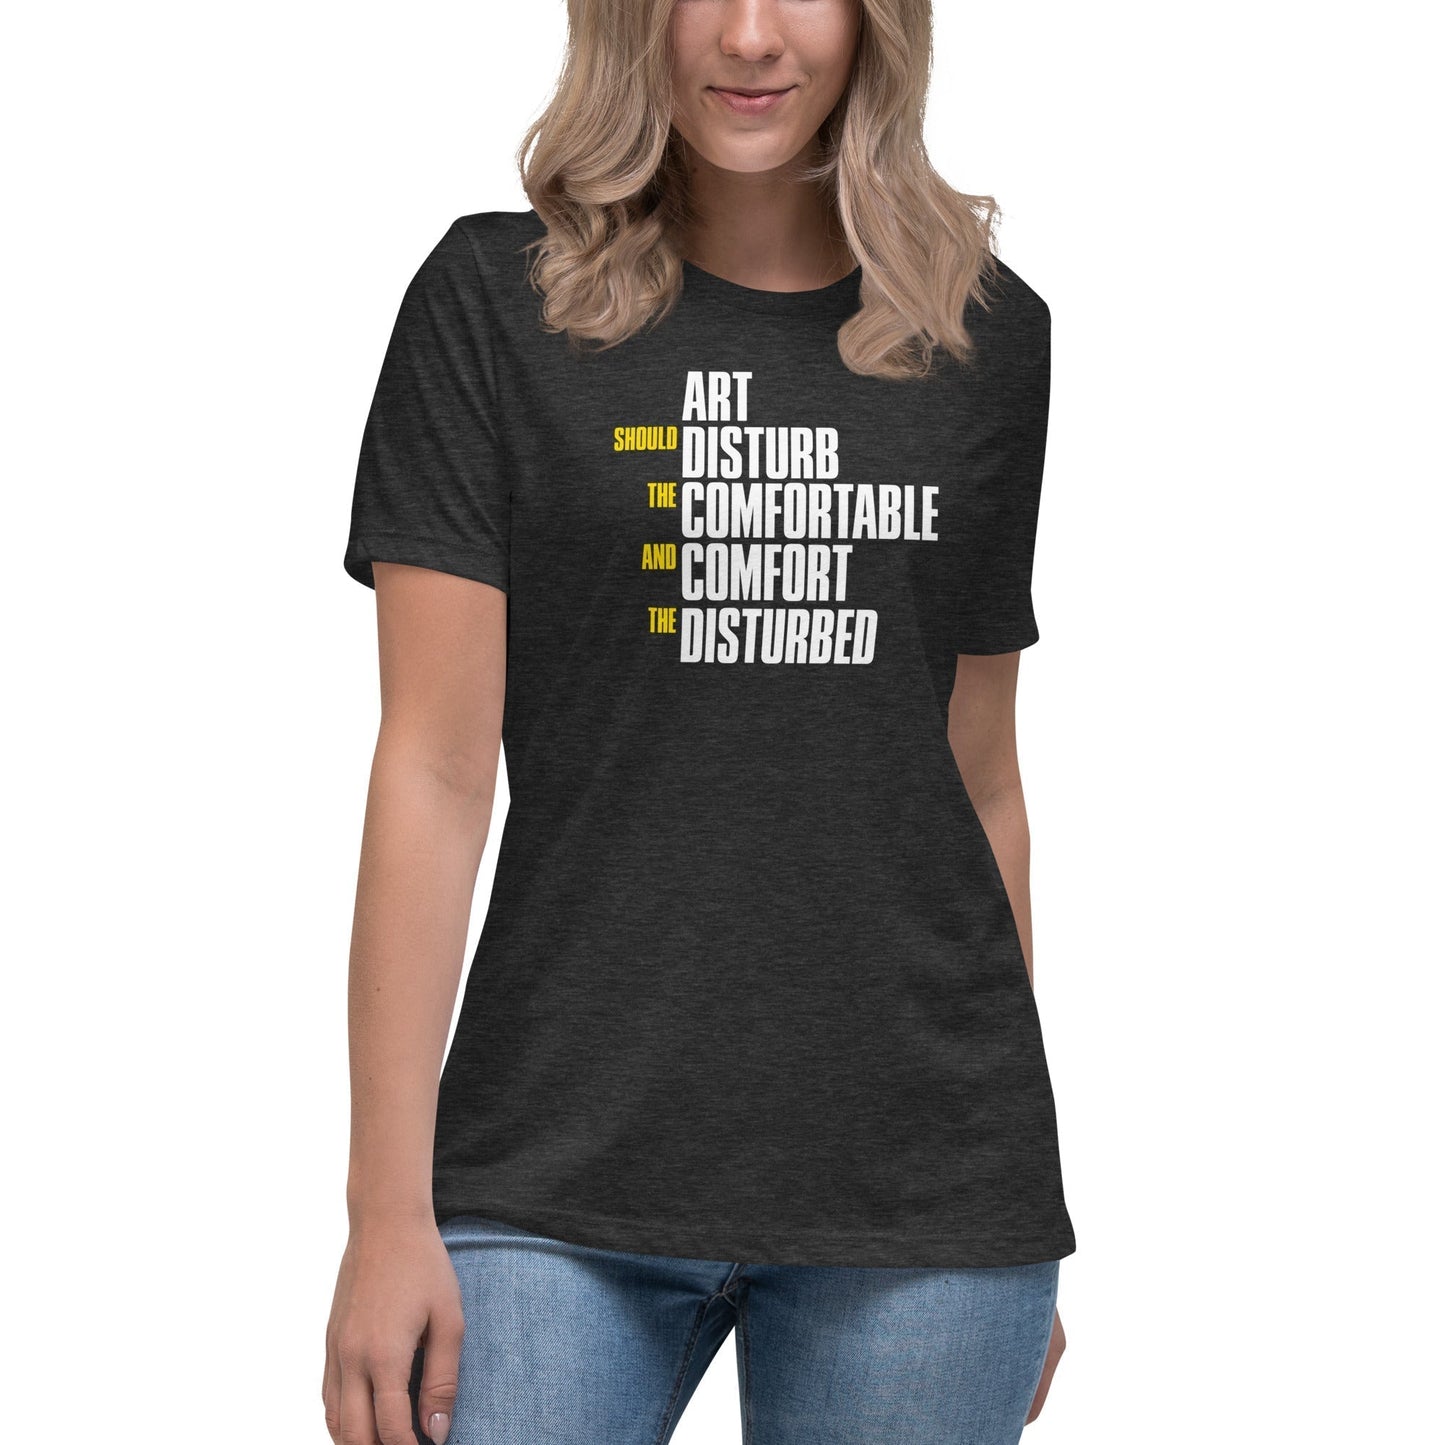 Art Should Disturb The Comfortable And Comfort The Disturbed - Women's T-Shirt